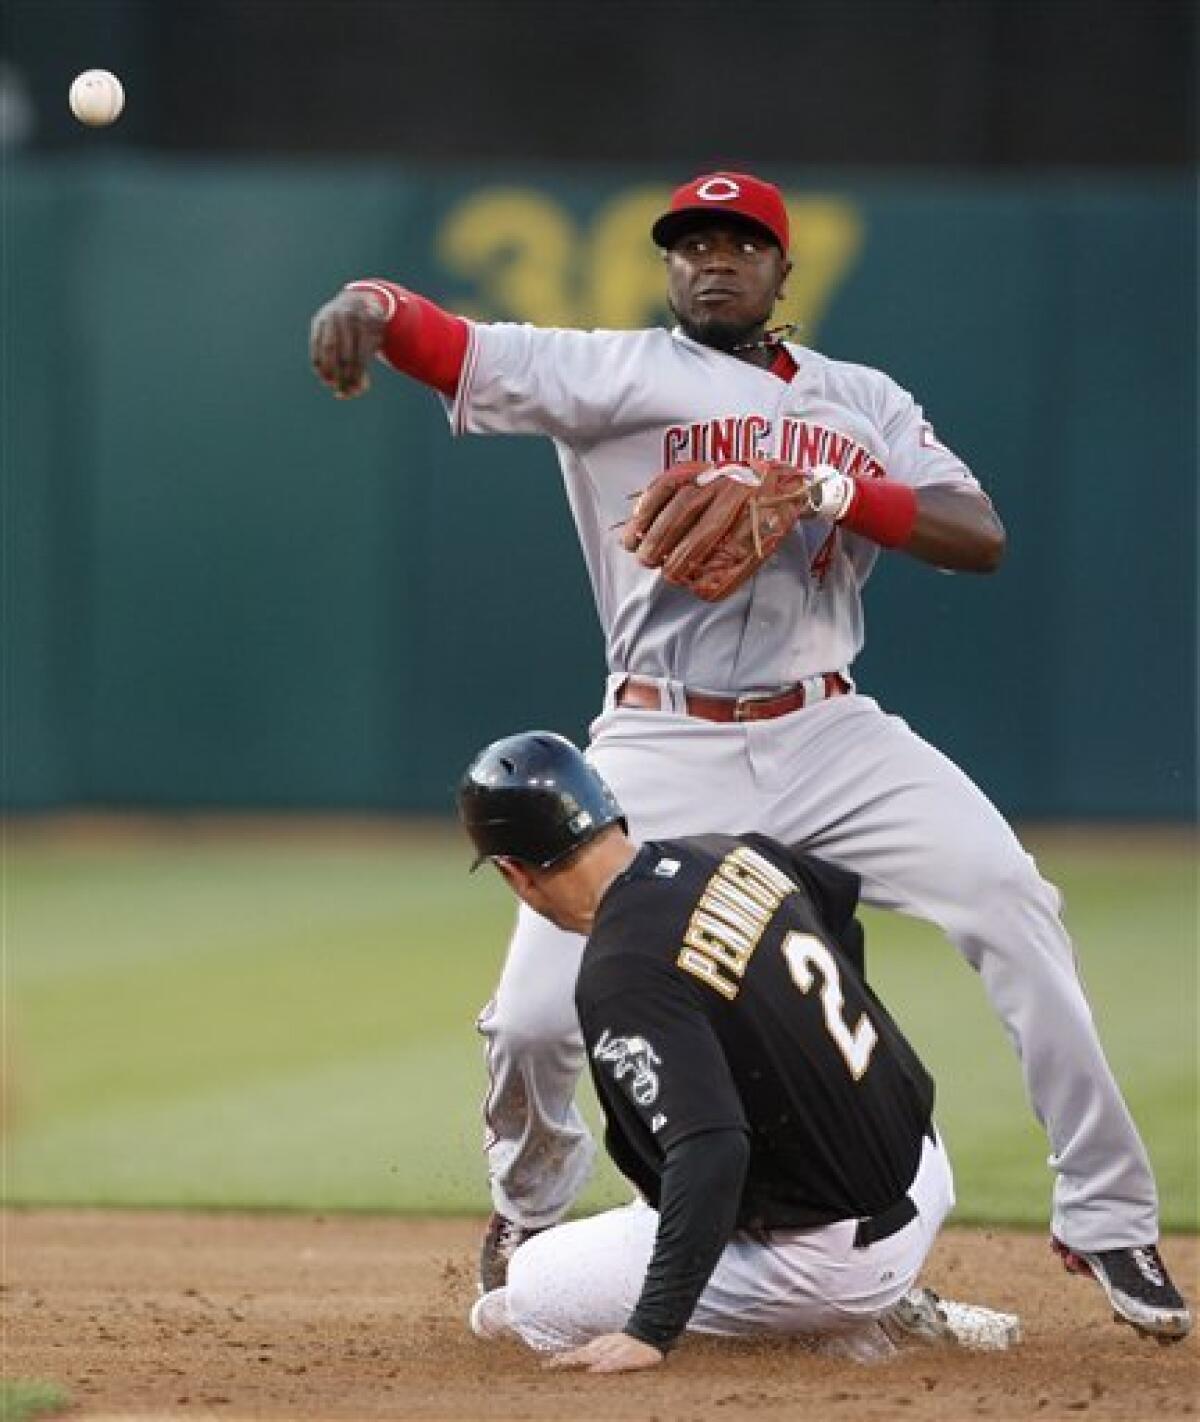 Brandon Phillips (4) throws to first base during the game between